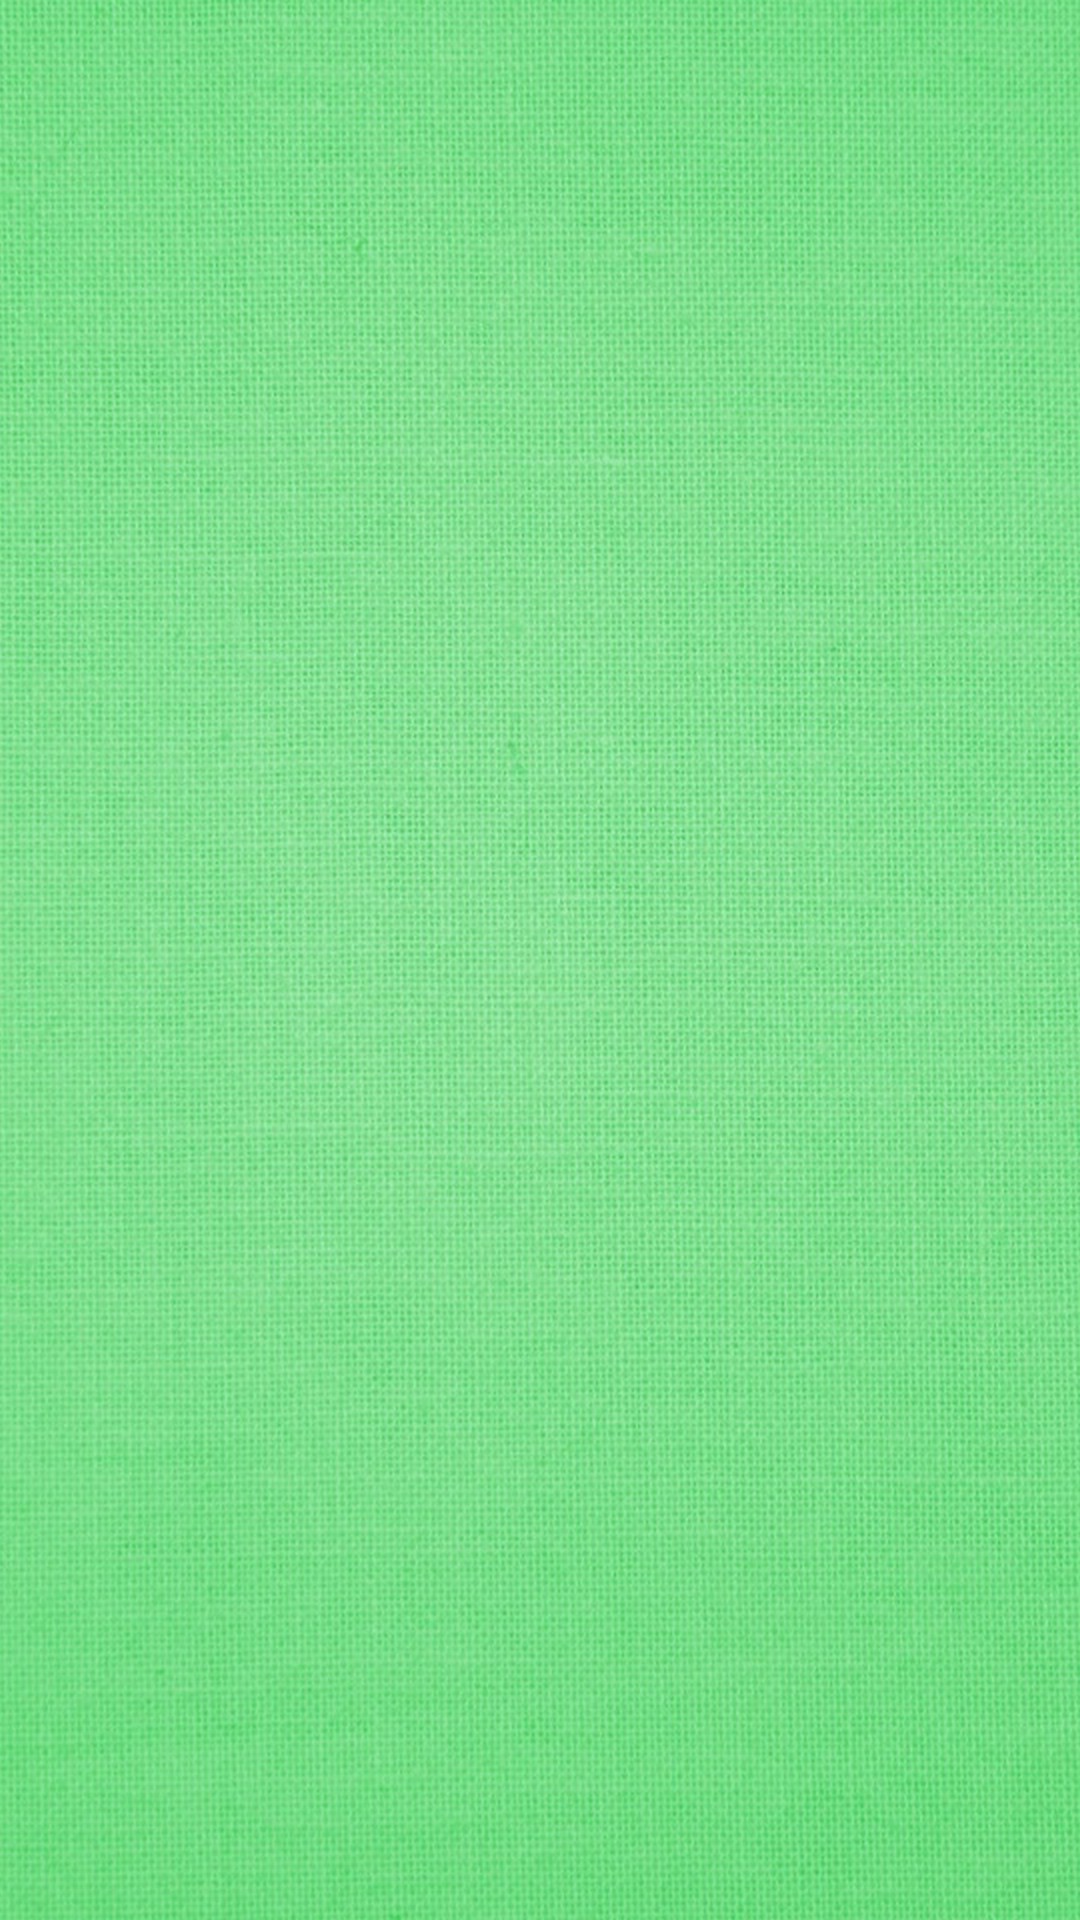 Green iPhone 7 Plus Wallpaper With Resolution 1080X1920 pixel. You can make this wallpaper for your Desktop Computer Backgrounds, Mac Wallpapers, Android Lock screen or iPhone Screensavers